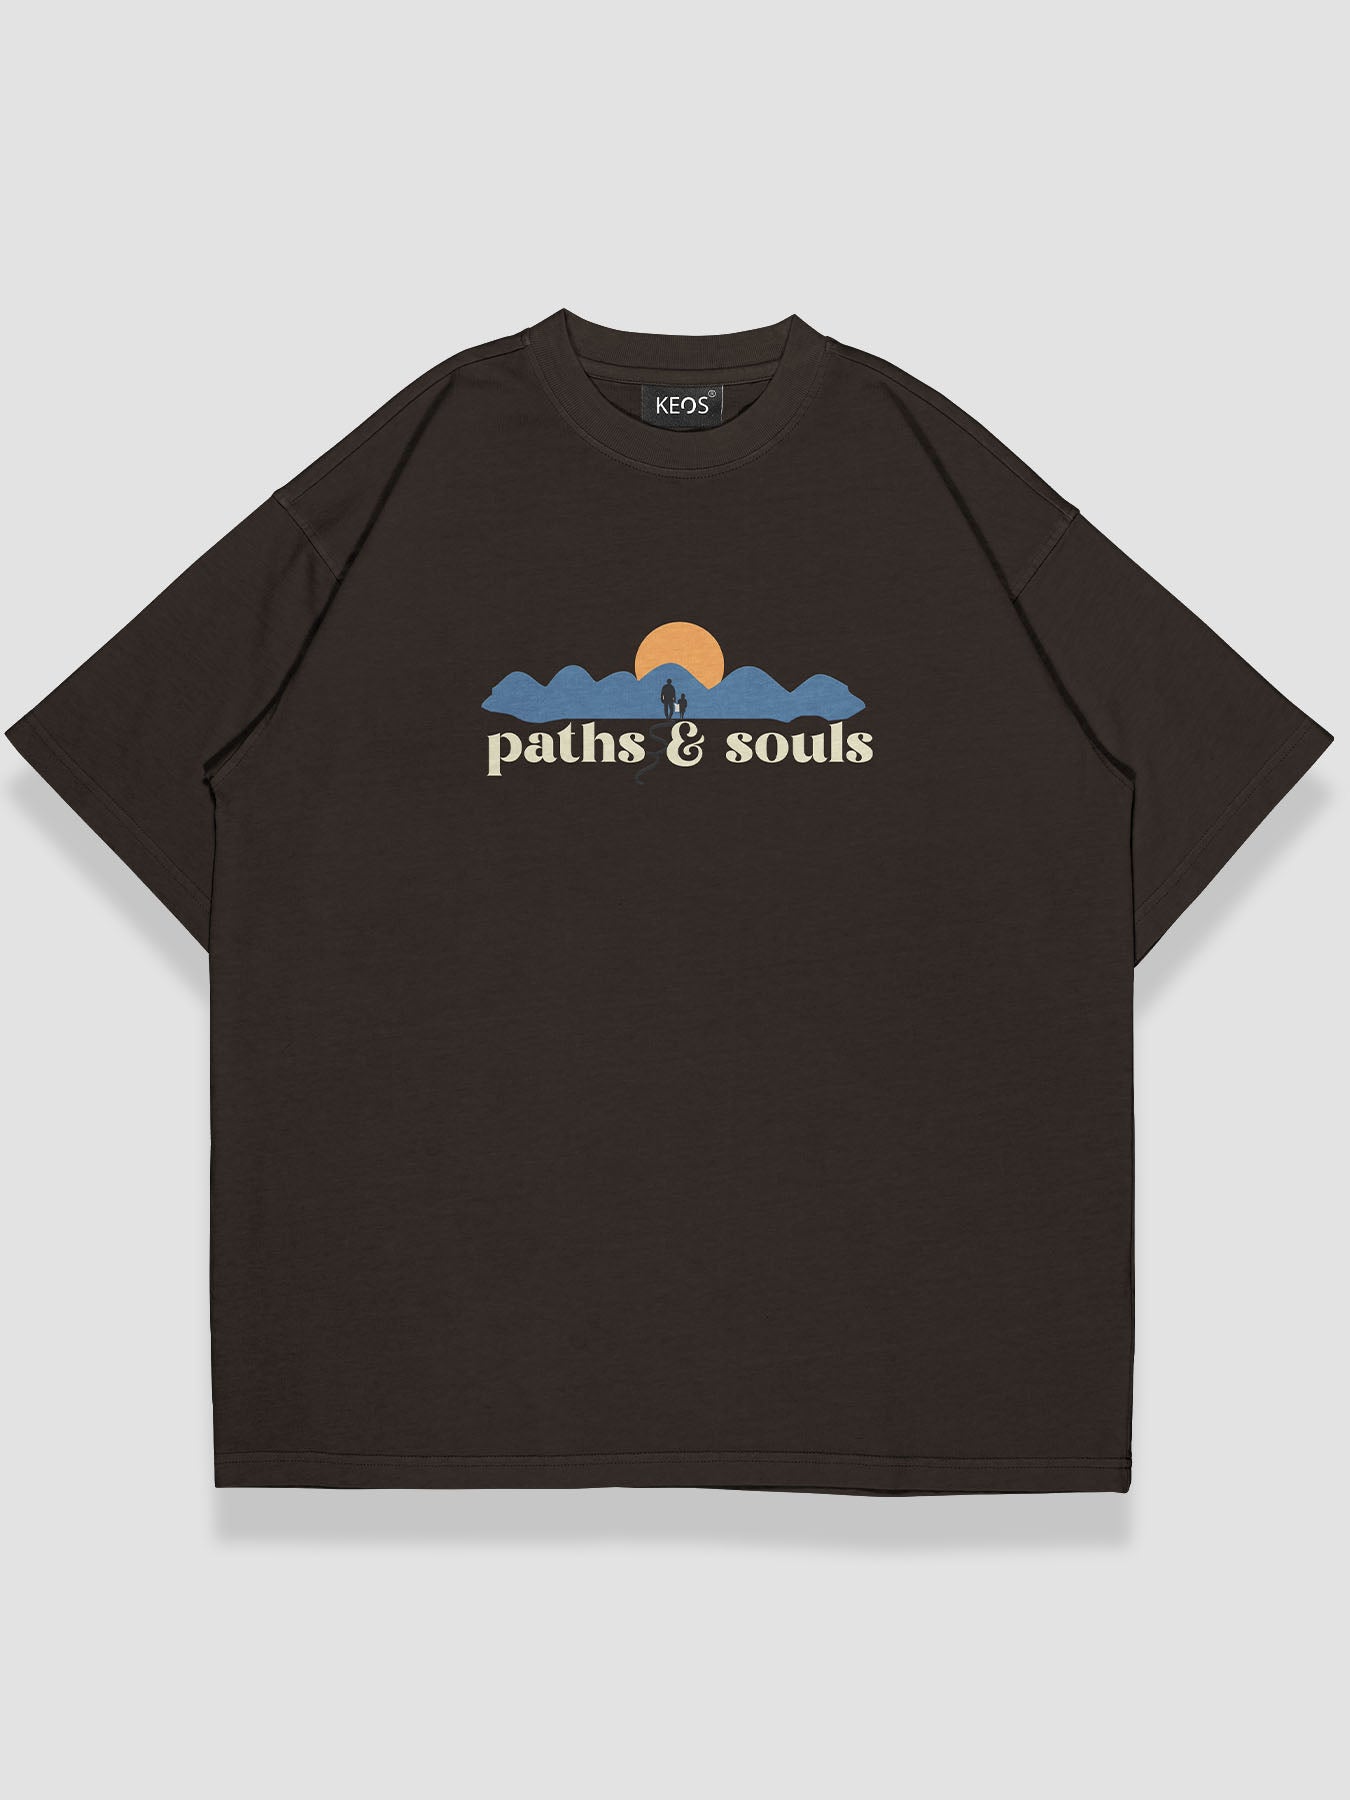 Paths & Souls Urban Fit Oversize T-shirt - keos.life